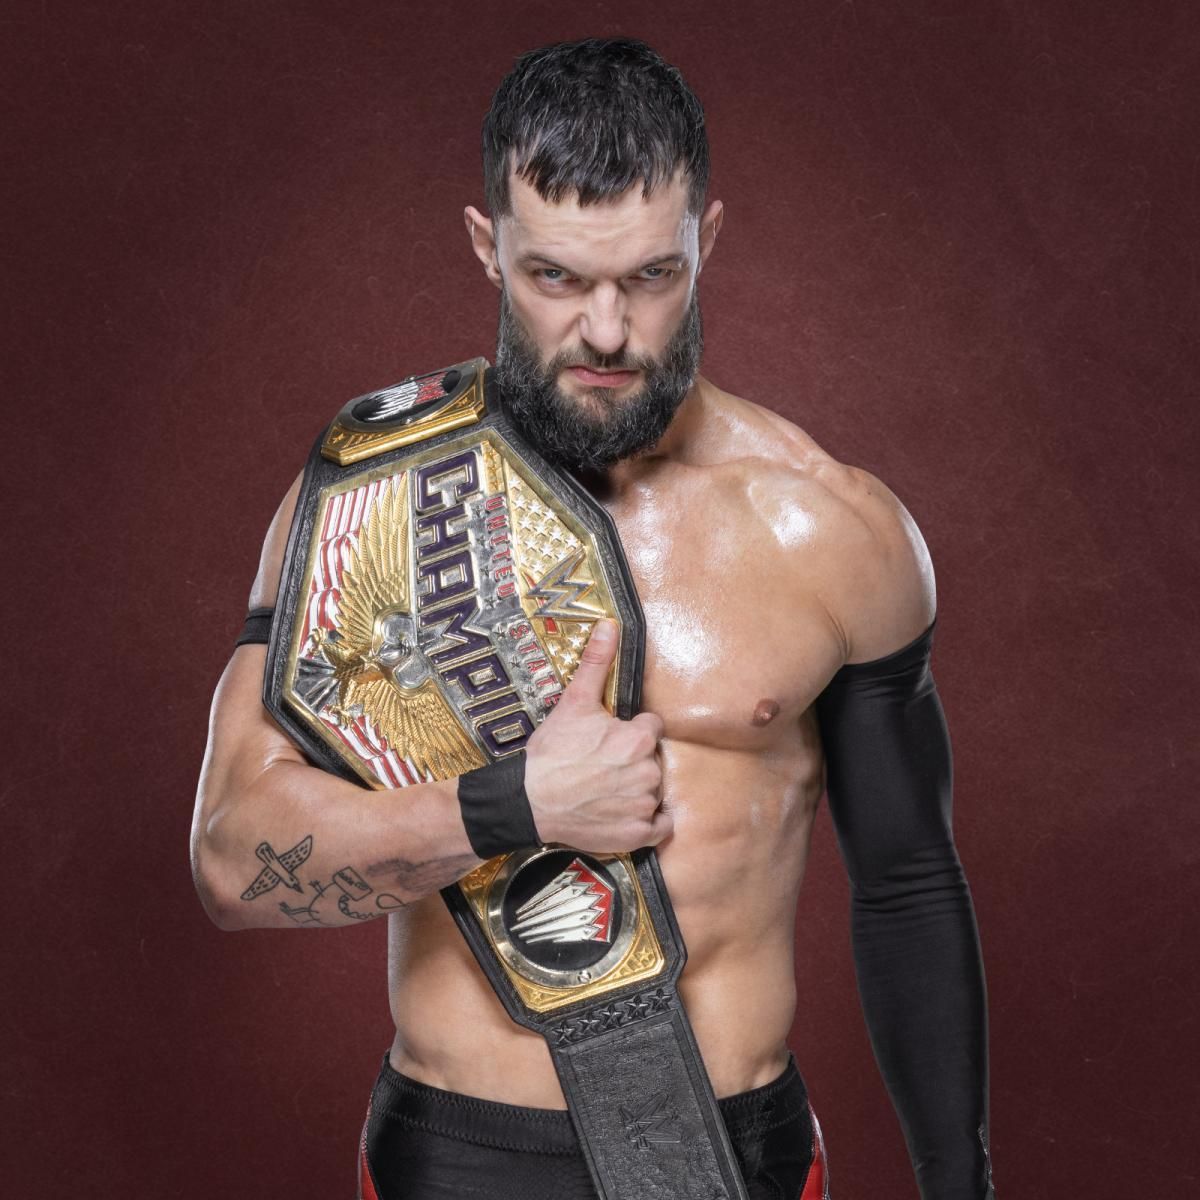 The reigning United States Champion, Finn B&aacute;lor.